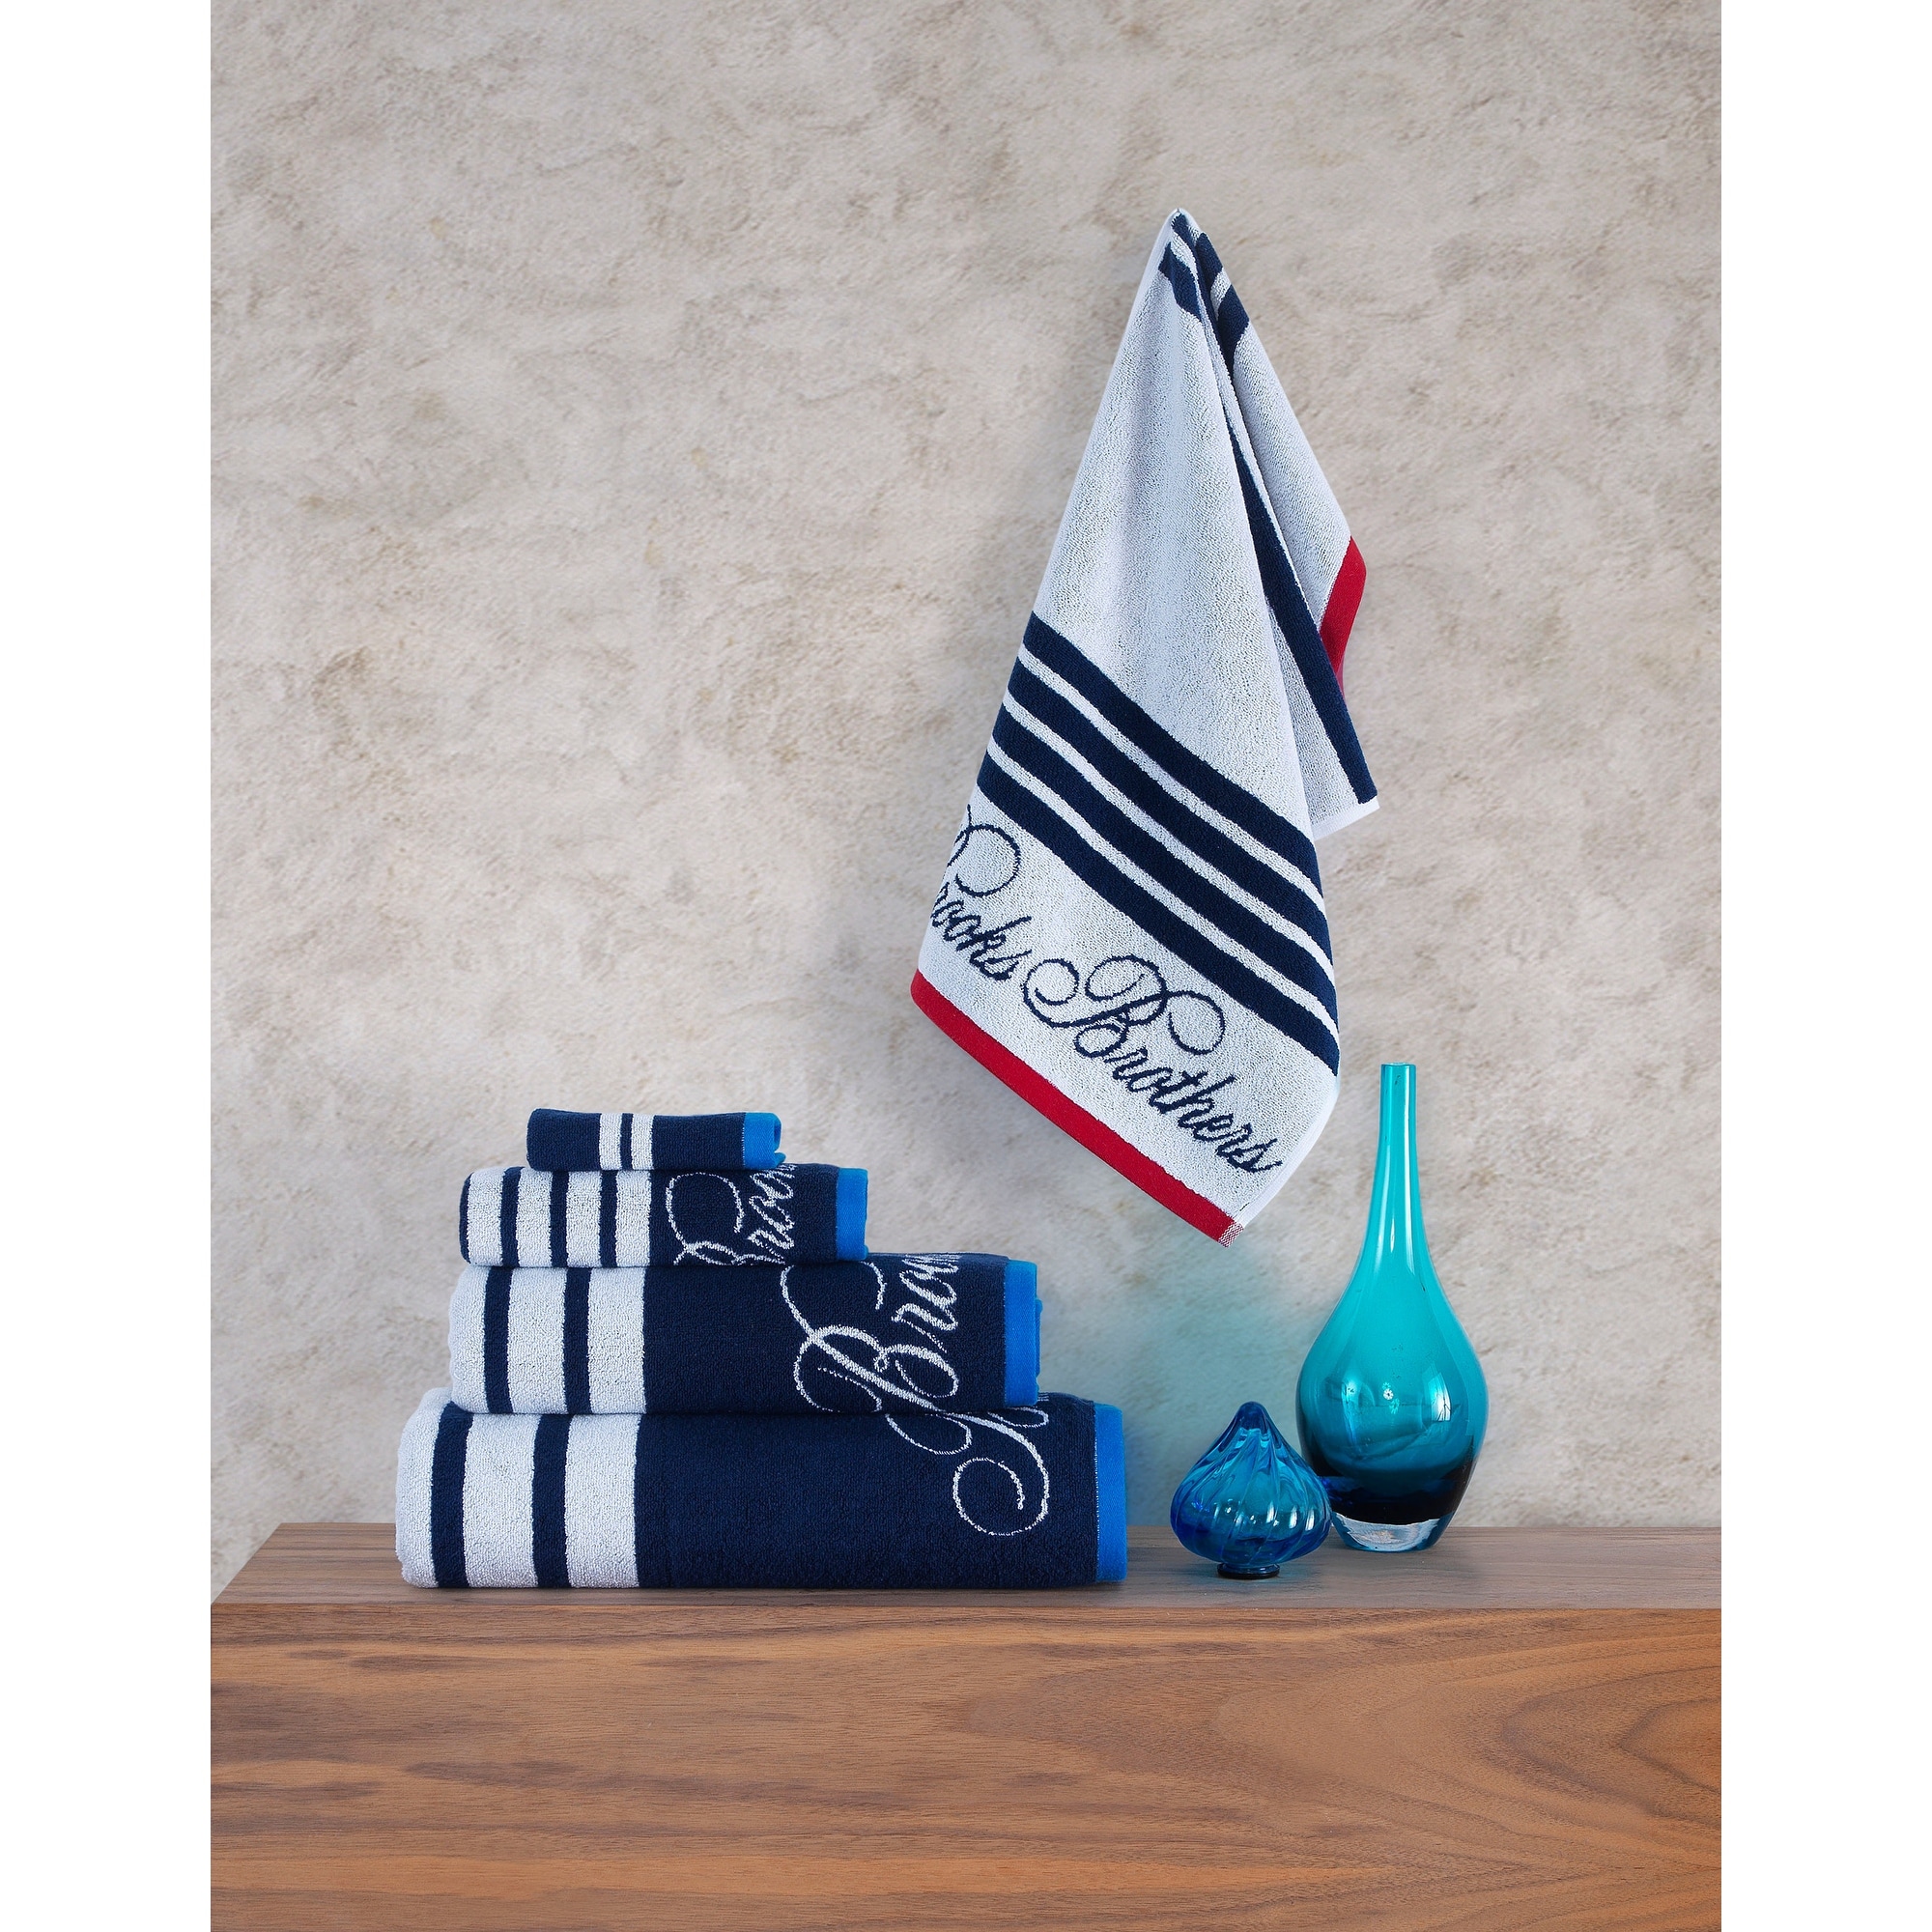 https://ak1.ostkcdn.com/images/products/is/images/direct/a8a65ed23ed360007e8d48714b5d7a998c167525/Brooks-Brothers-Nautical-Blanket-Stripe-2-pcs-Bath-Sheets.jpg